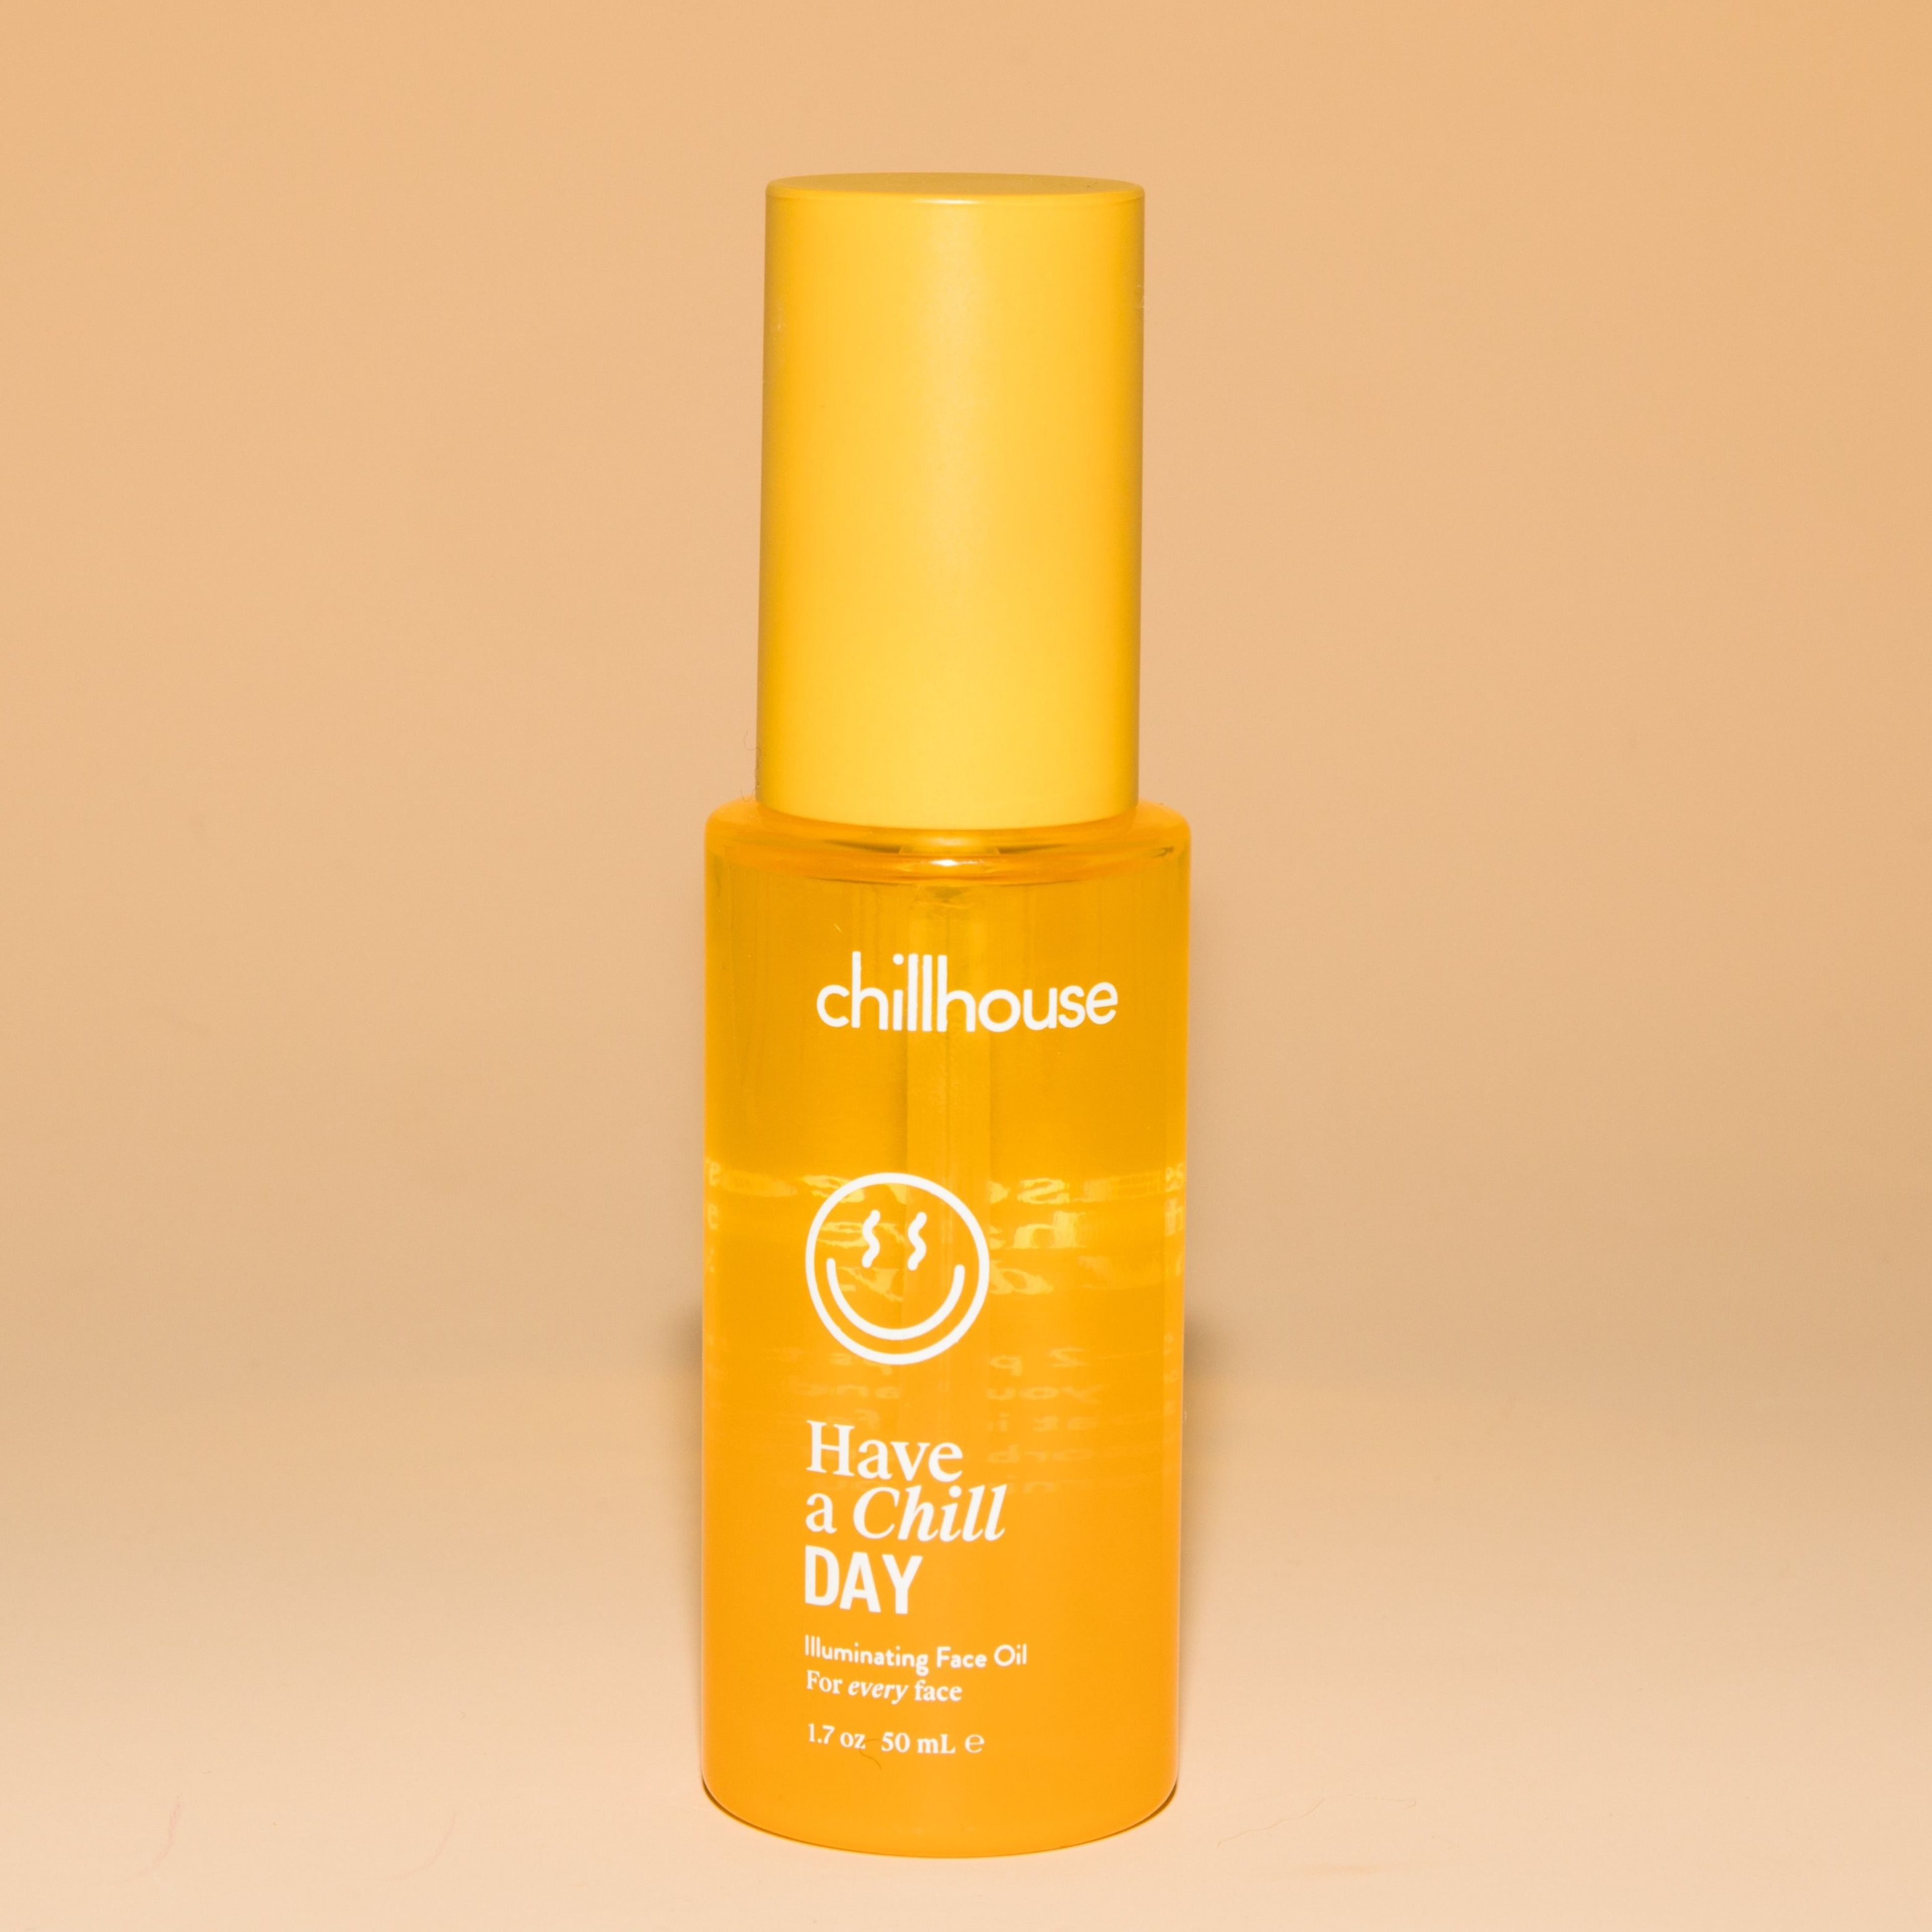 Have a Chill Day Face Oil